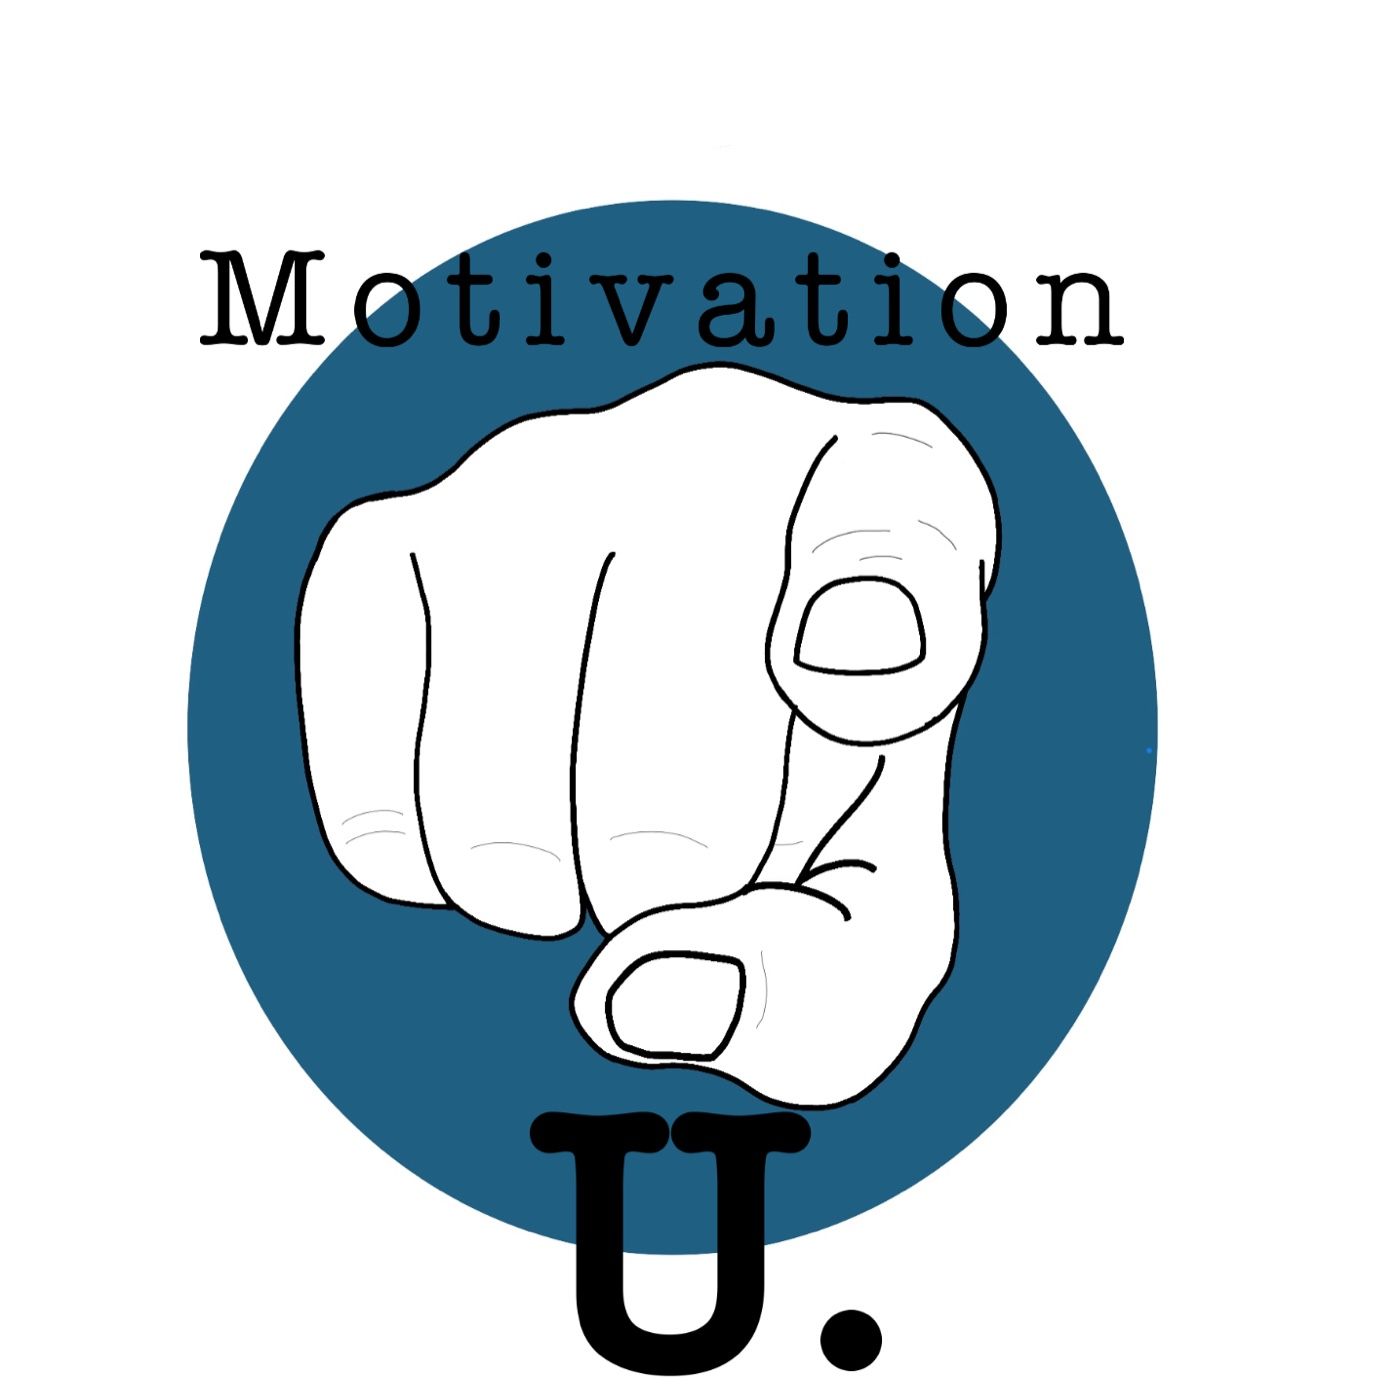 Episode 241 - Motivation U - Jellyroll - “I believe that who we were is not…”